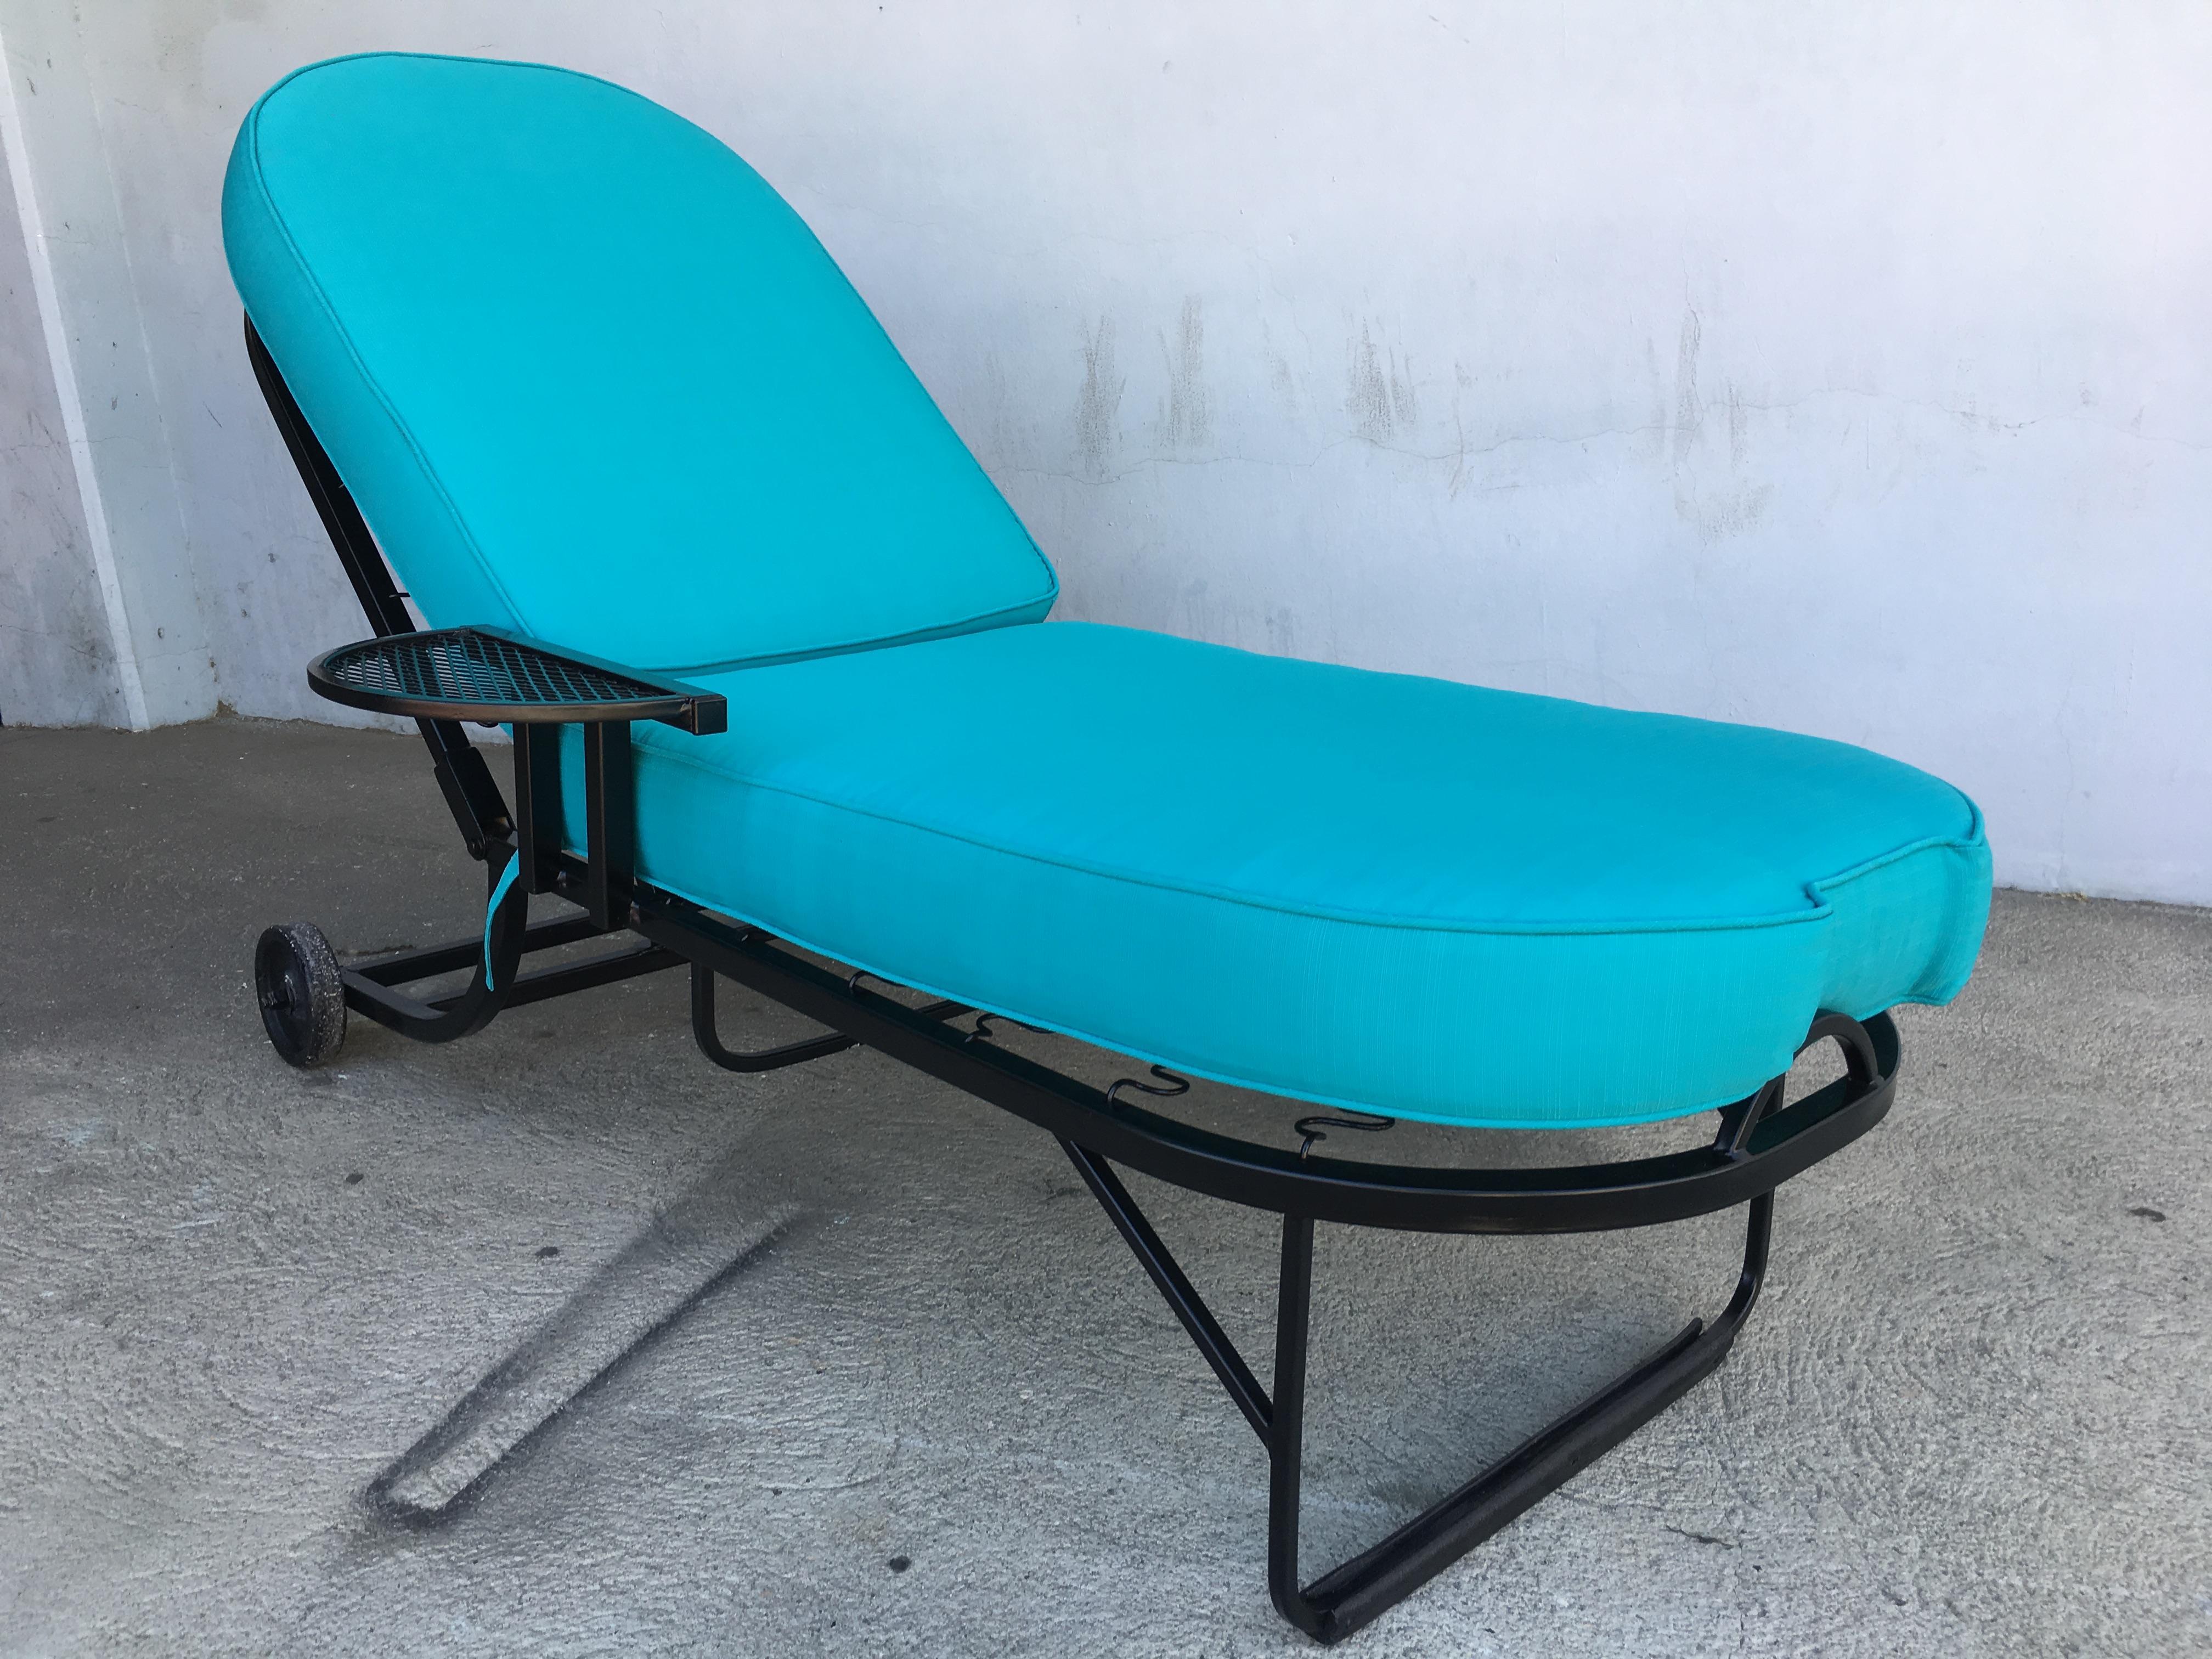 patio chaise lounges